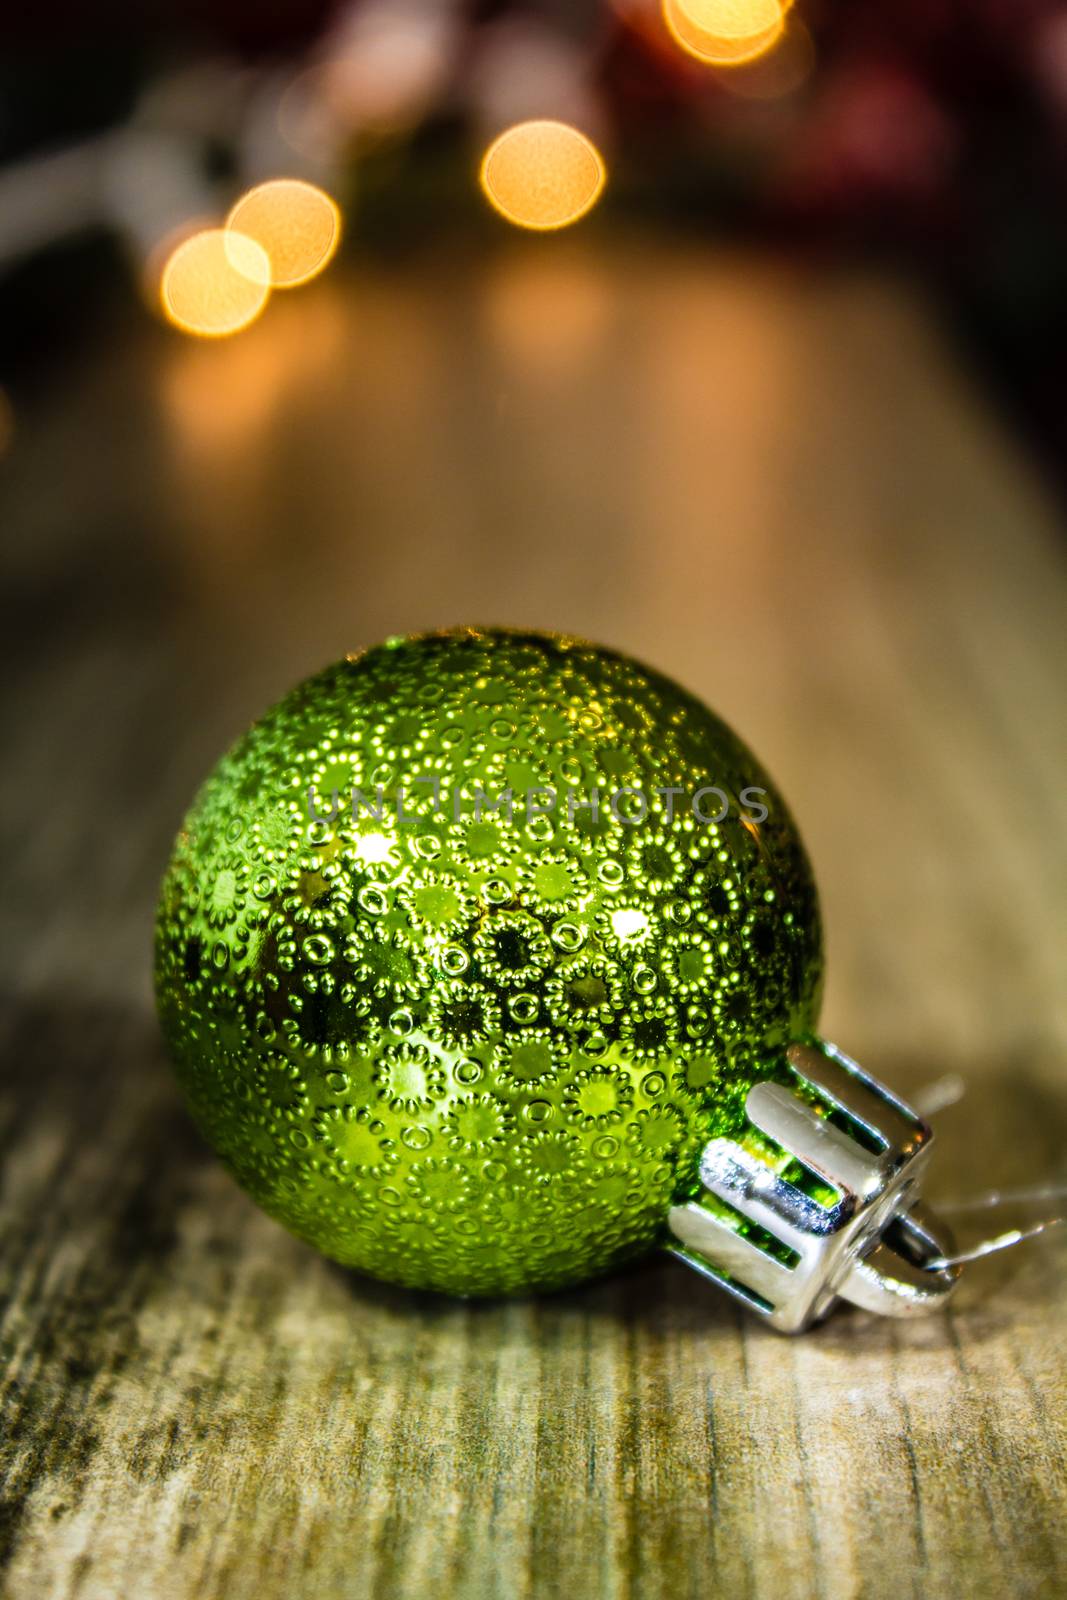 A green patterned Christmas ornament on a wooden background.